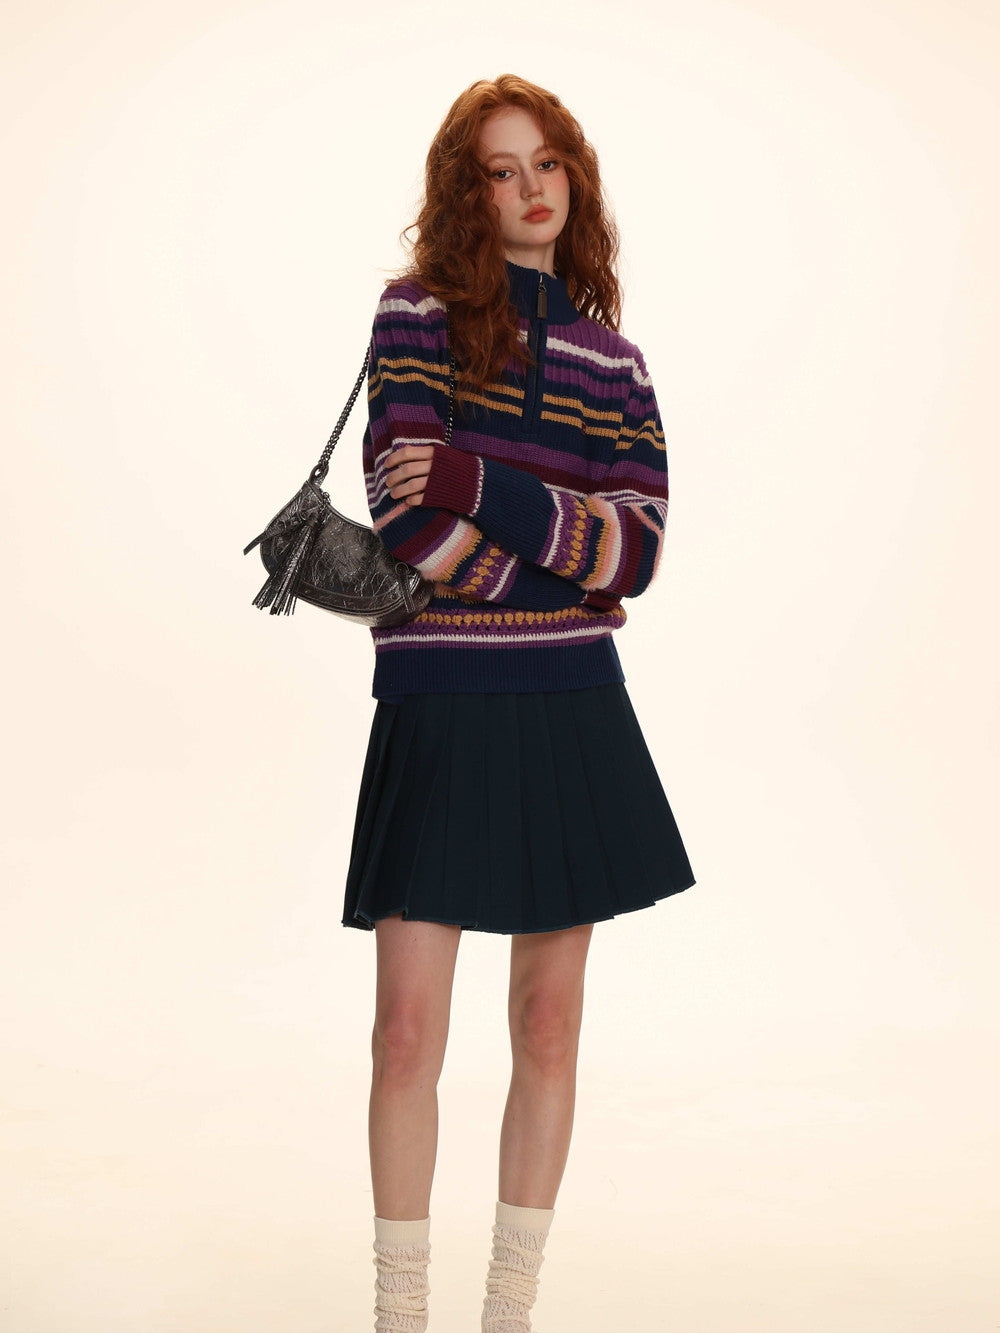 Retro Colorful Knit With High-Neck Border - chiclara